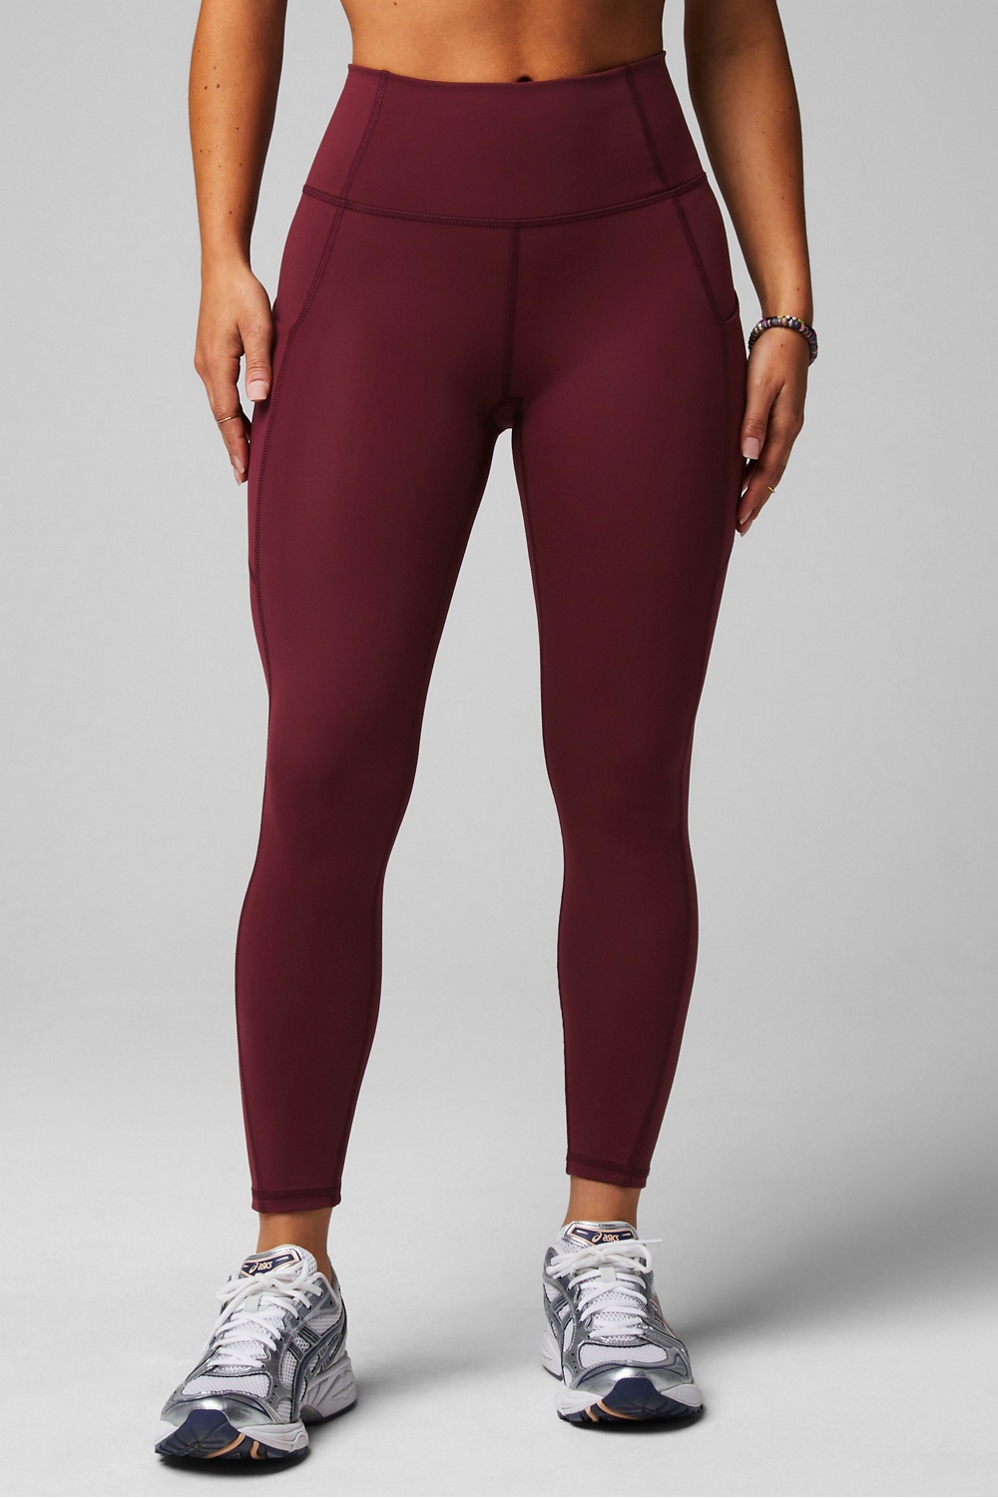 0936 NWT Fabletics Oasis PureLuxe High-Waisted Twist 7/8 Legging XL 12-14